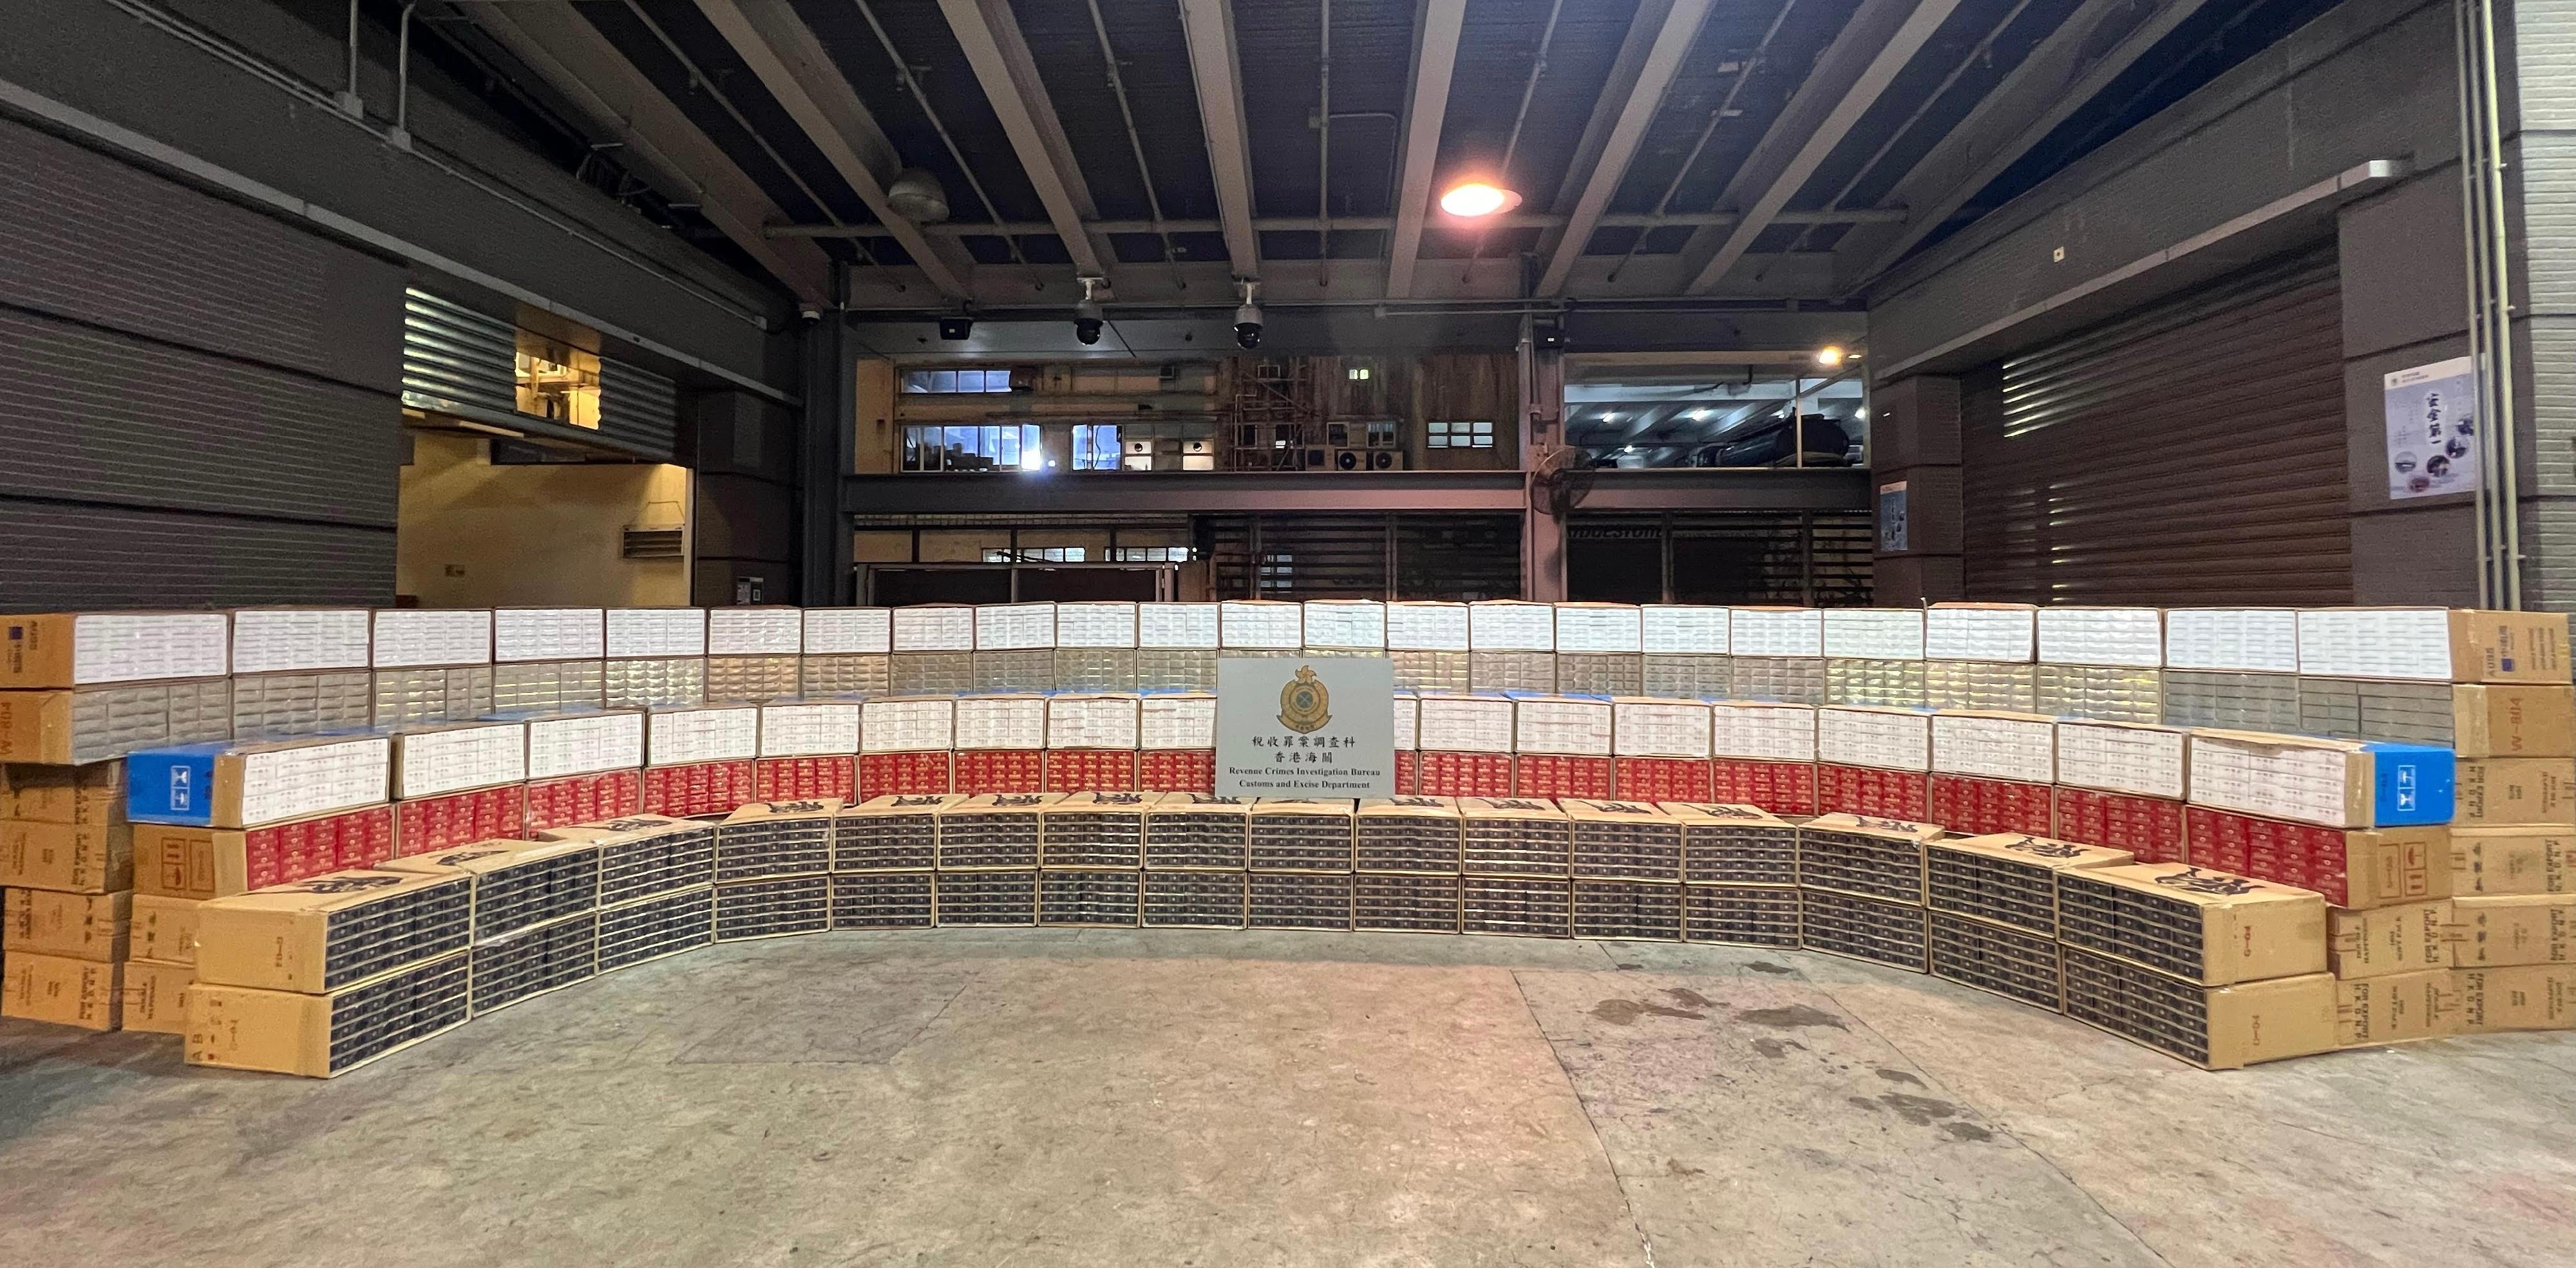 Hong Kong Customs yesterday (July 25) seized about 10 million suspected illicit cigarettes with an estimated market value of about $27 million and a duty potential of about $19 million in Kwai Chung. Photo shows some of the suspected illicit cigarettes seized.